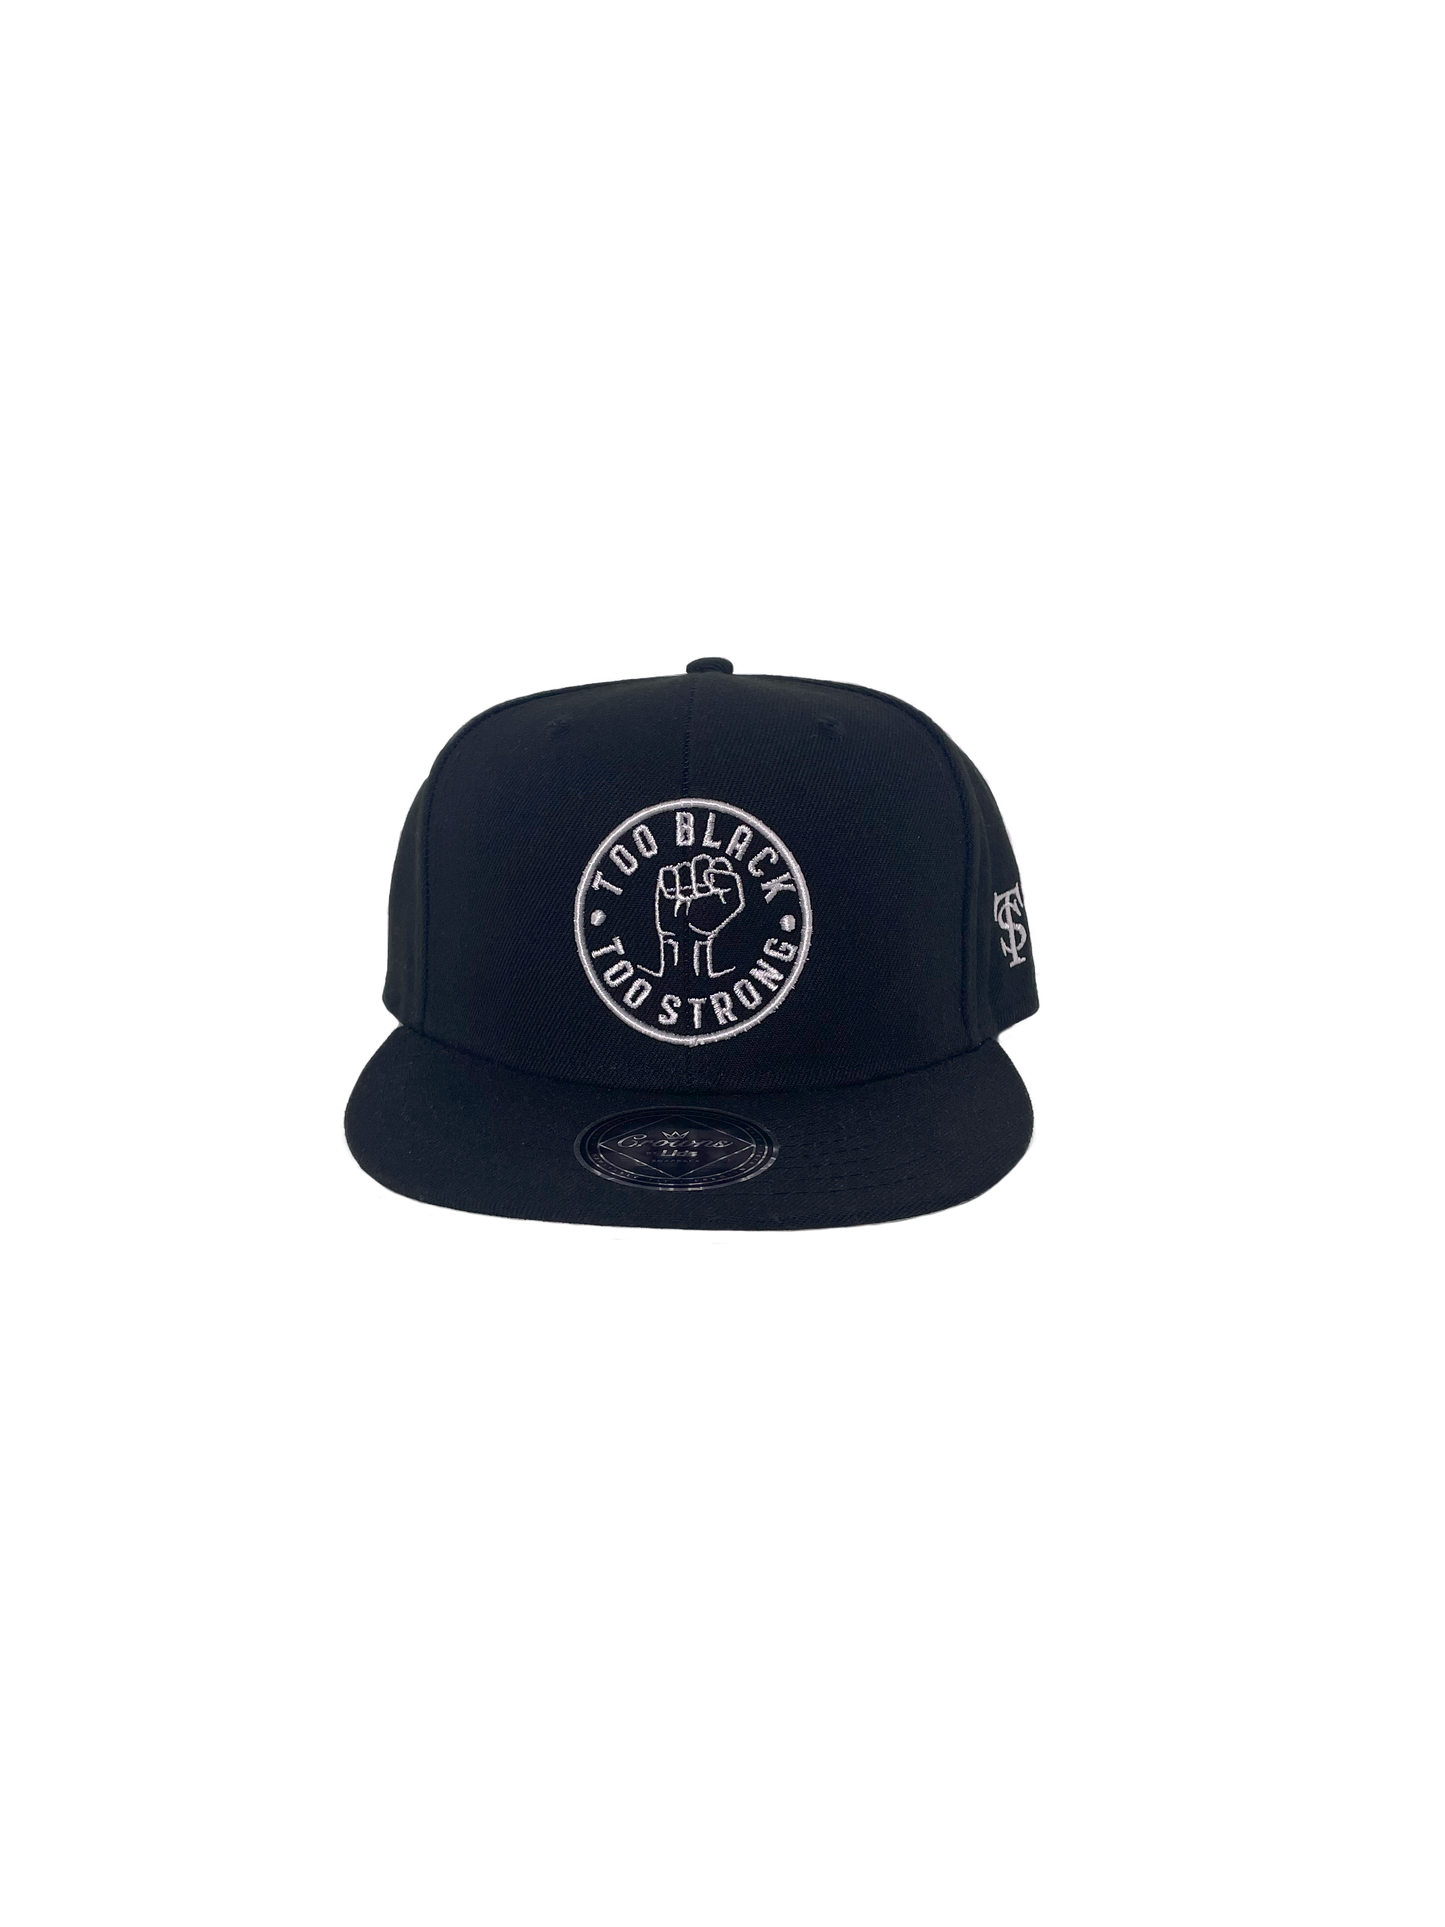 TOO BLACK TOO STRONG / T/S -Black SNAPBACK: Black / Red / Blue